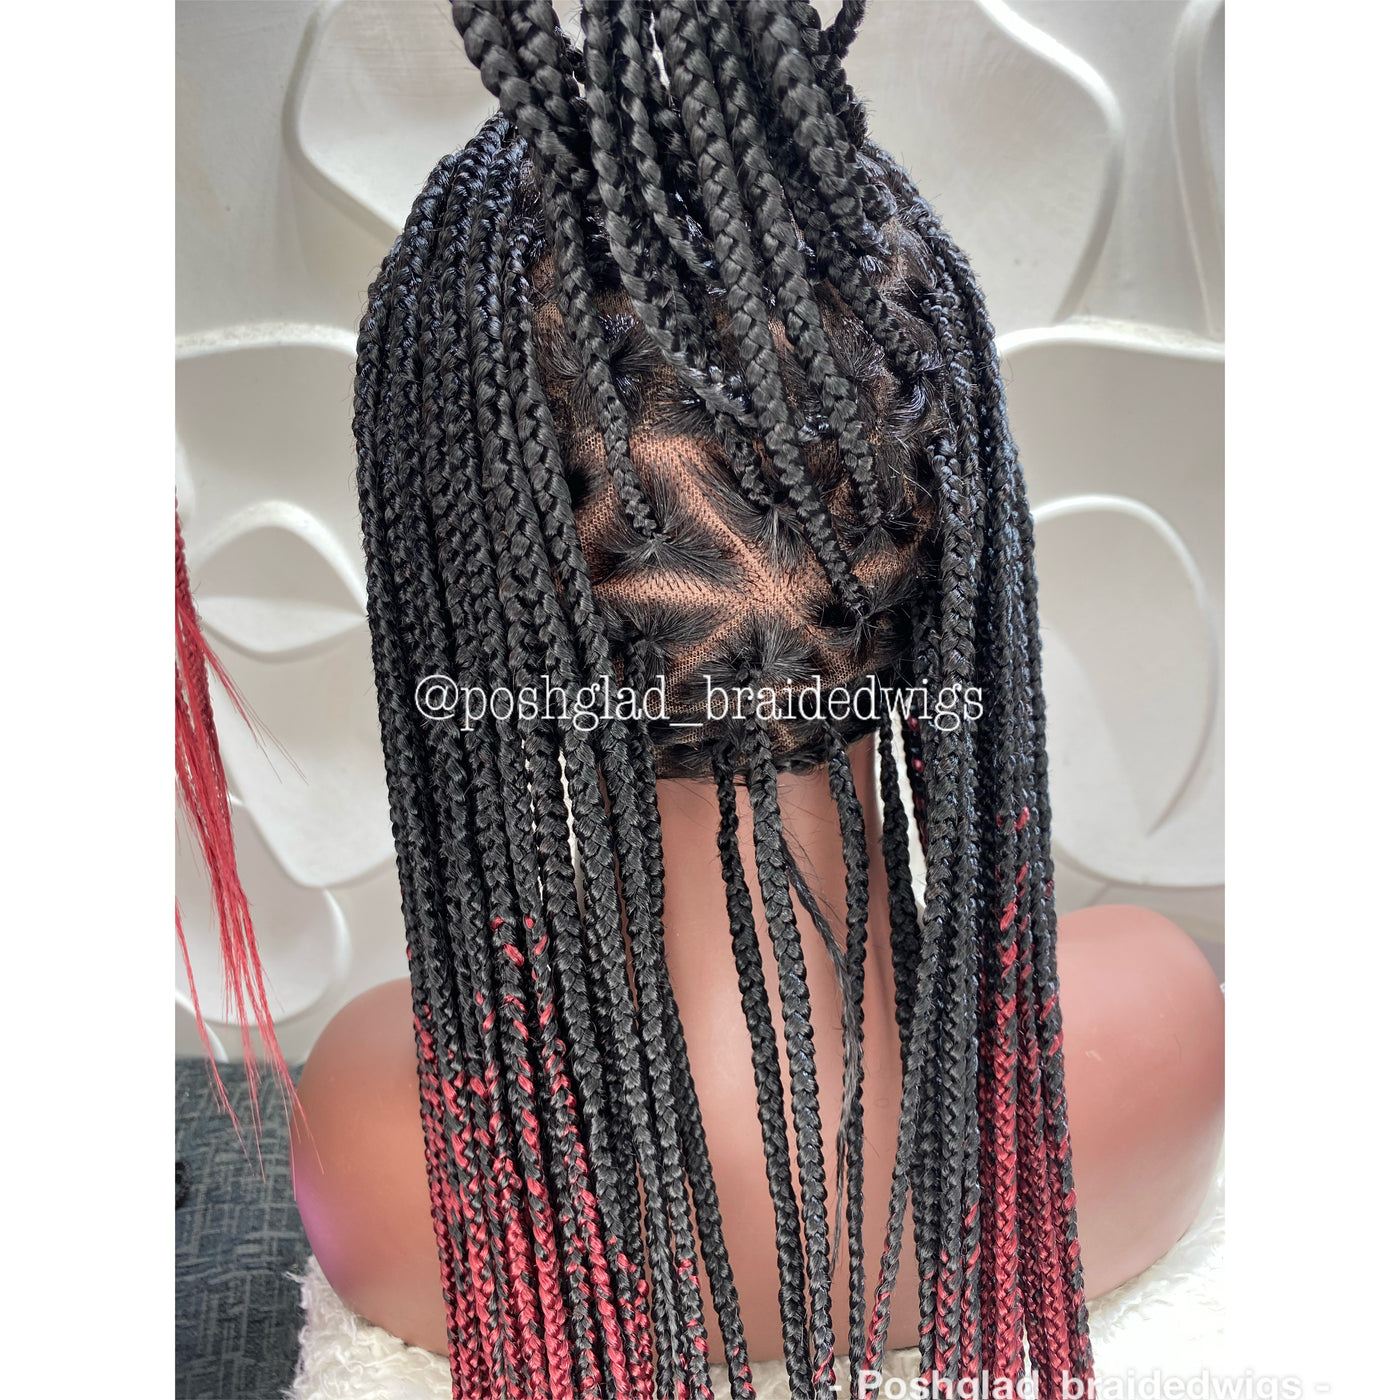 SHADE KNOTLESS BURGUNDY OMBRE. (LACE TYPE: FULL LACE) Poshglad Braided Wigs box braids